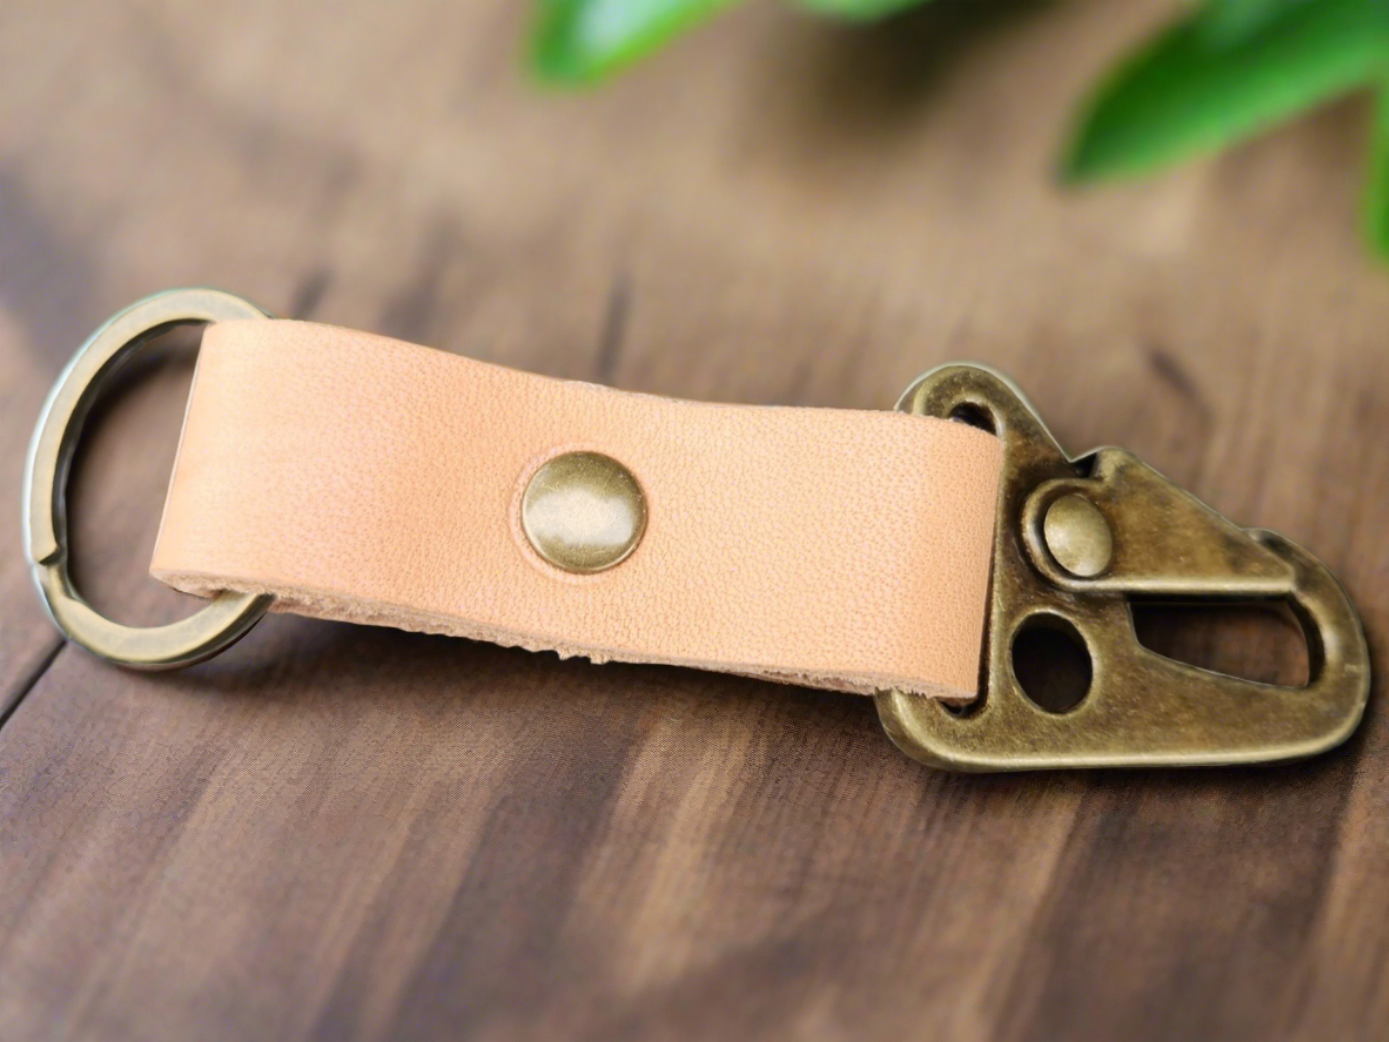 Leather Tactical HK clip keychain - Military Style Key ring